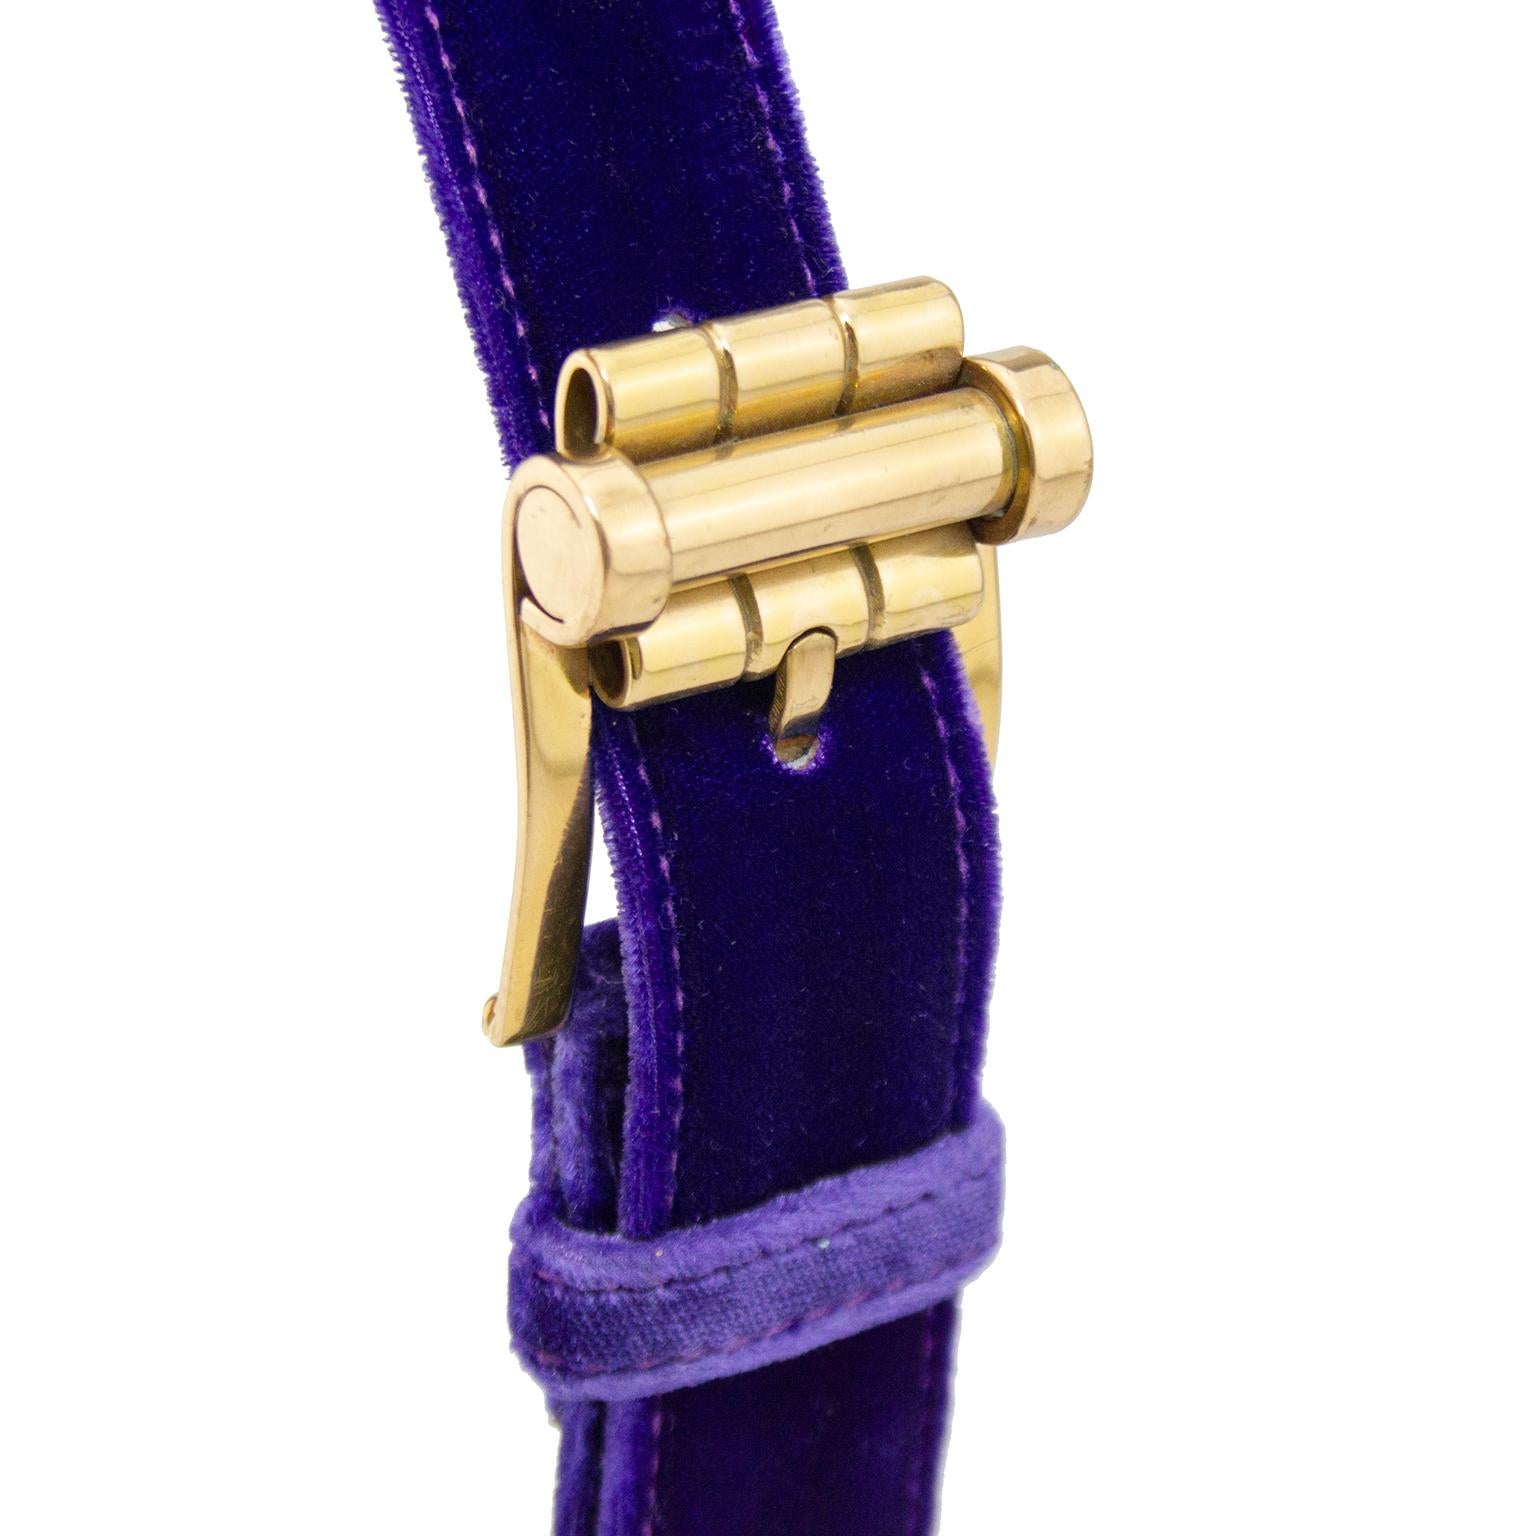 Gianni Versace belt from the early 1990s. Purple cut velvet with heavy gold tone hardware and large faux pearls. Interesting details on buckle. Tonal purple top stitching. Black leather interior with gold brand stamp. Excellent vintage condition.